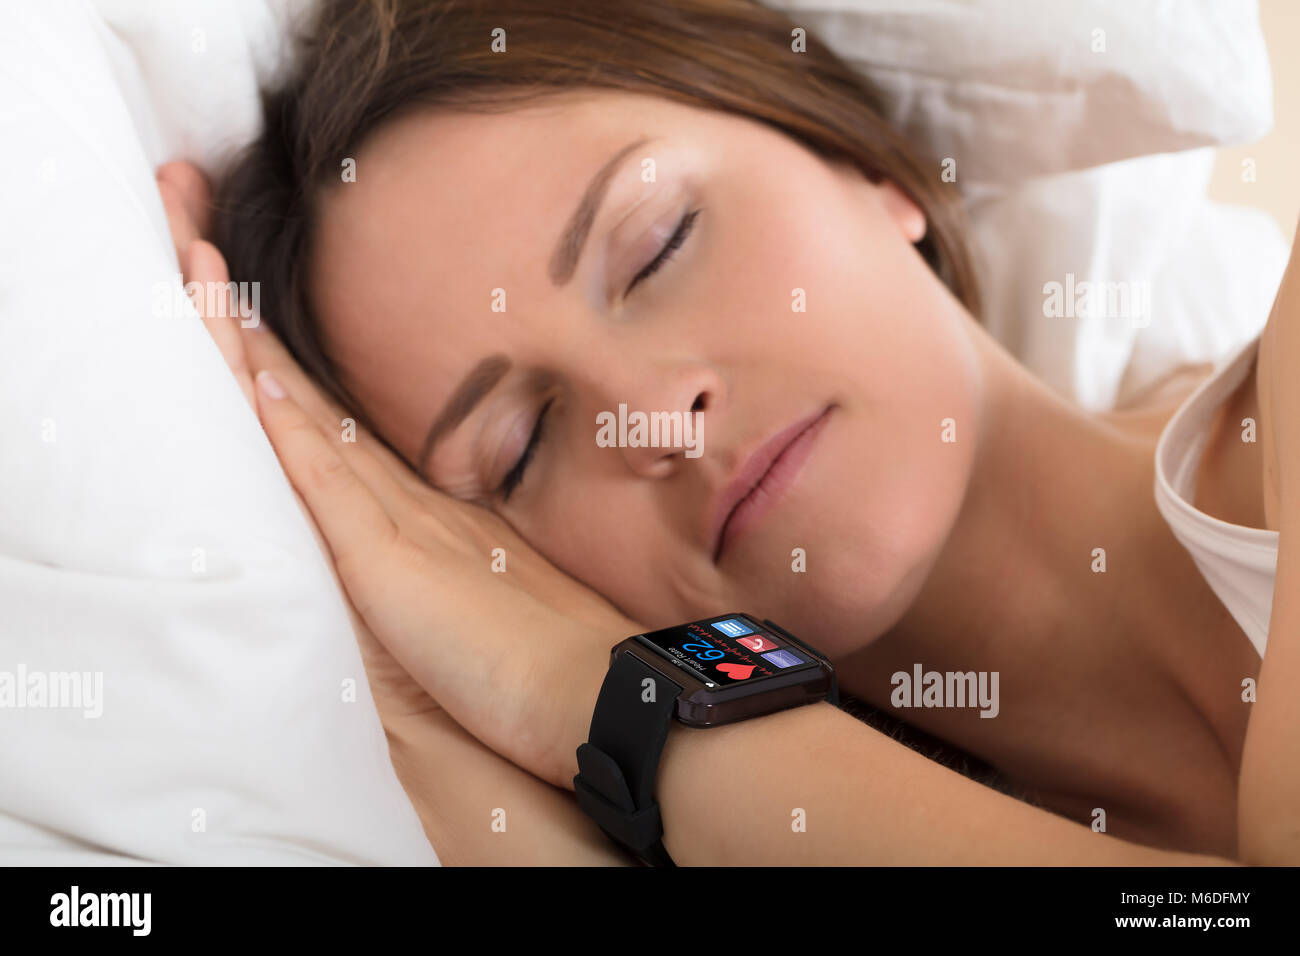 Close-up Of A Woman Sleeping With Smart Watch Showing Heartbeat Rate On Bed Stock Photo